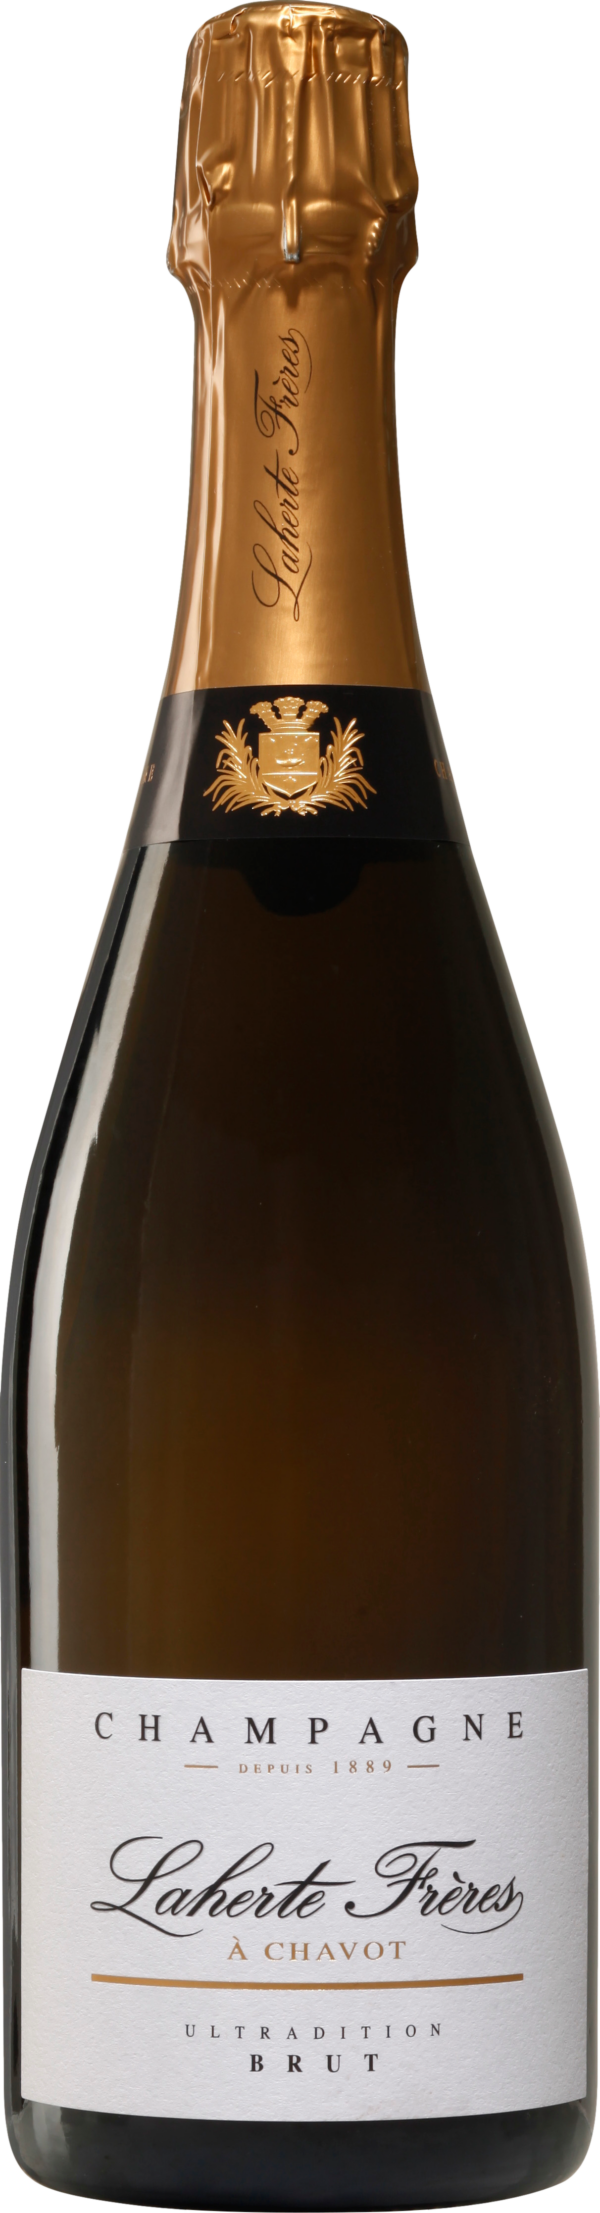 Product image of Champagne Laherte Freres Brut Ultradition from 8wines